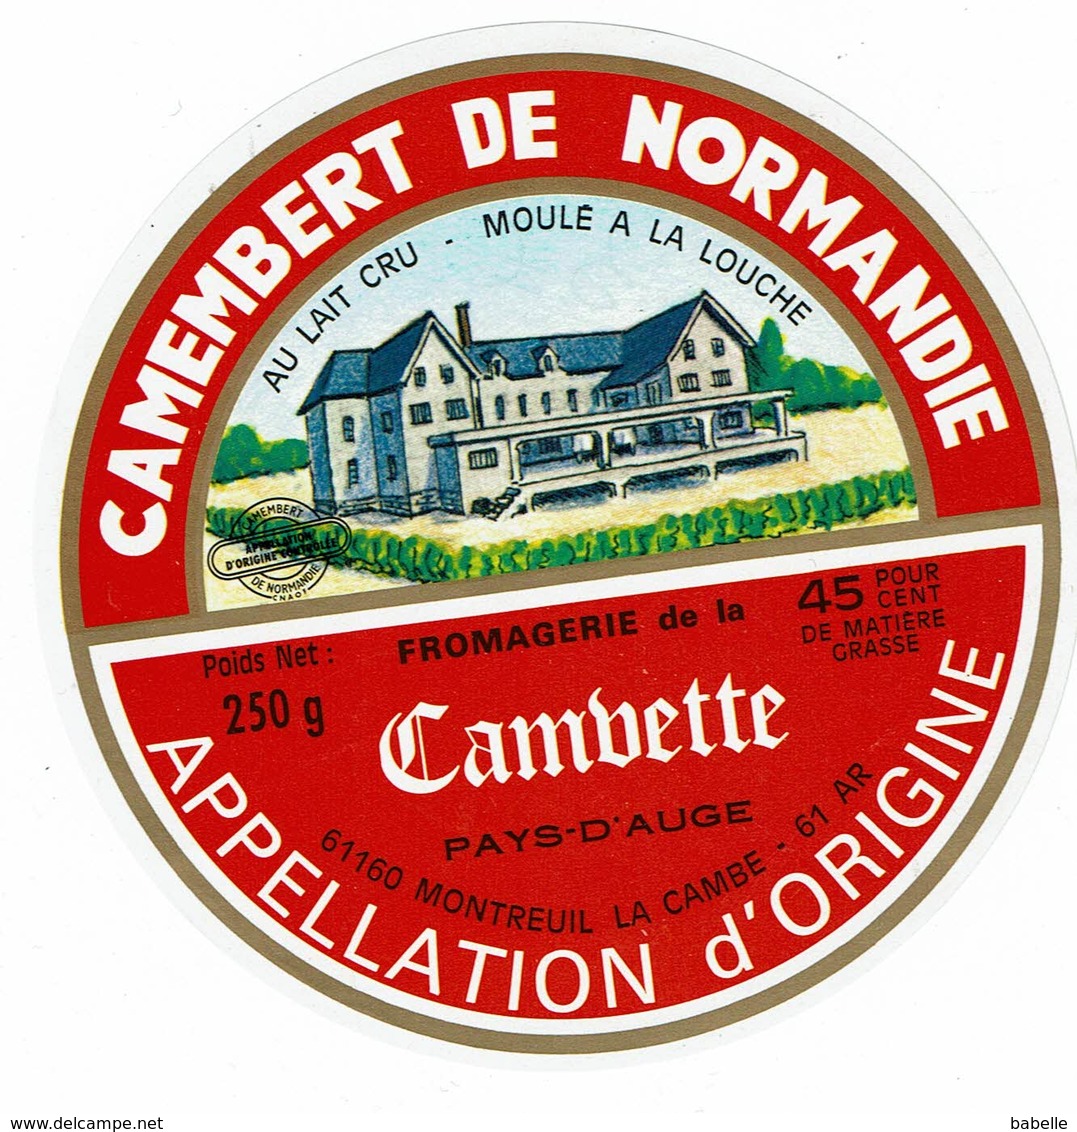 Et. Camembert De Normandie " CAMBETTE " Pays D'Auge - Fromagerie - Fromage